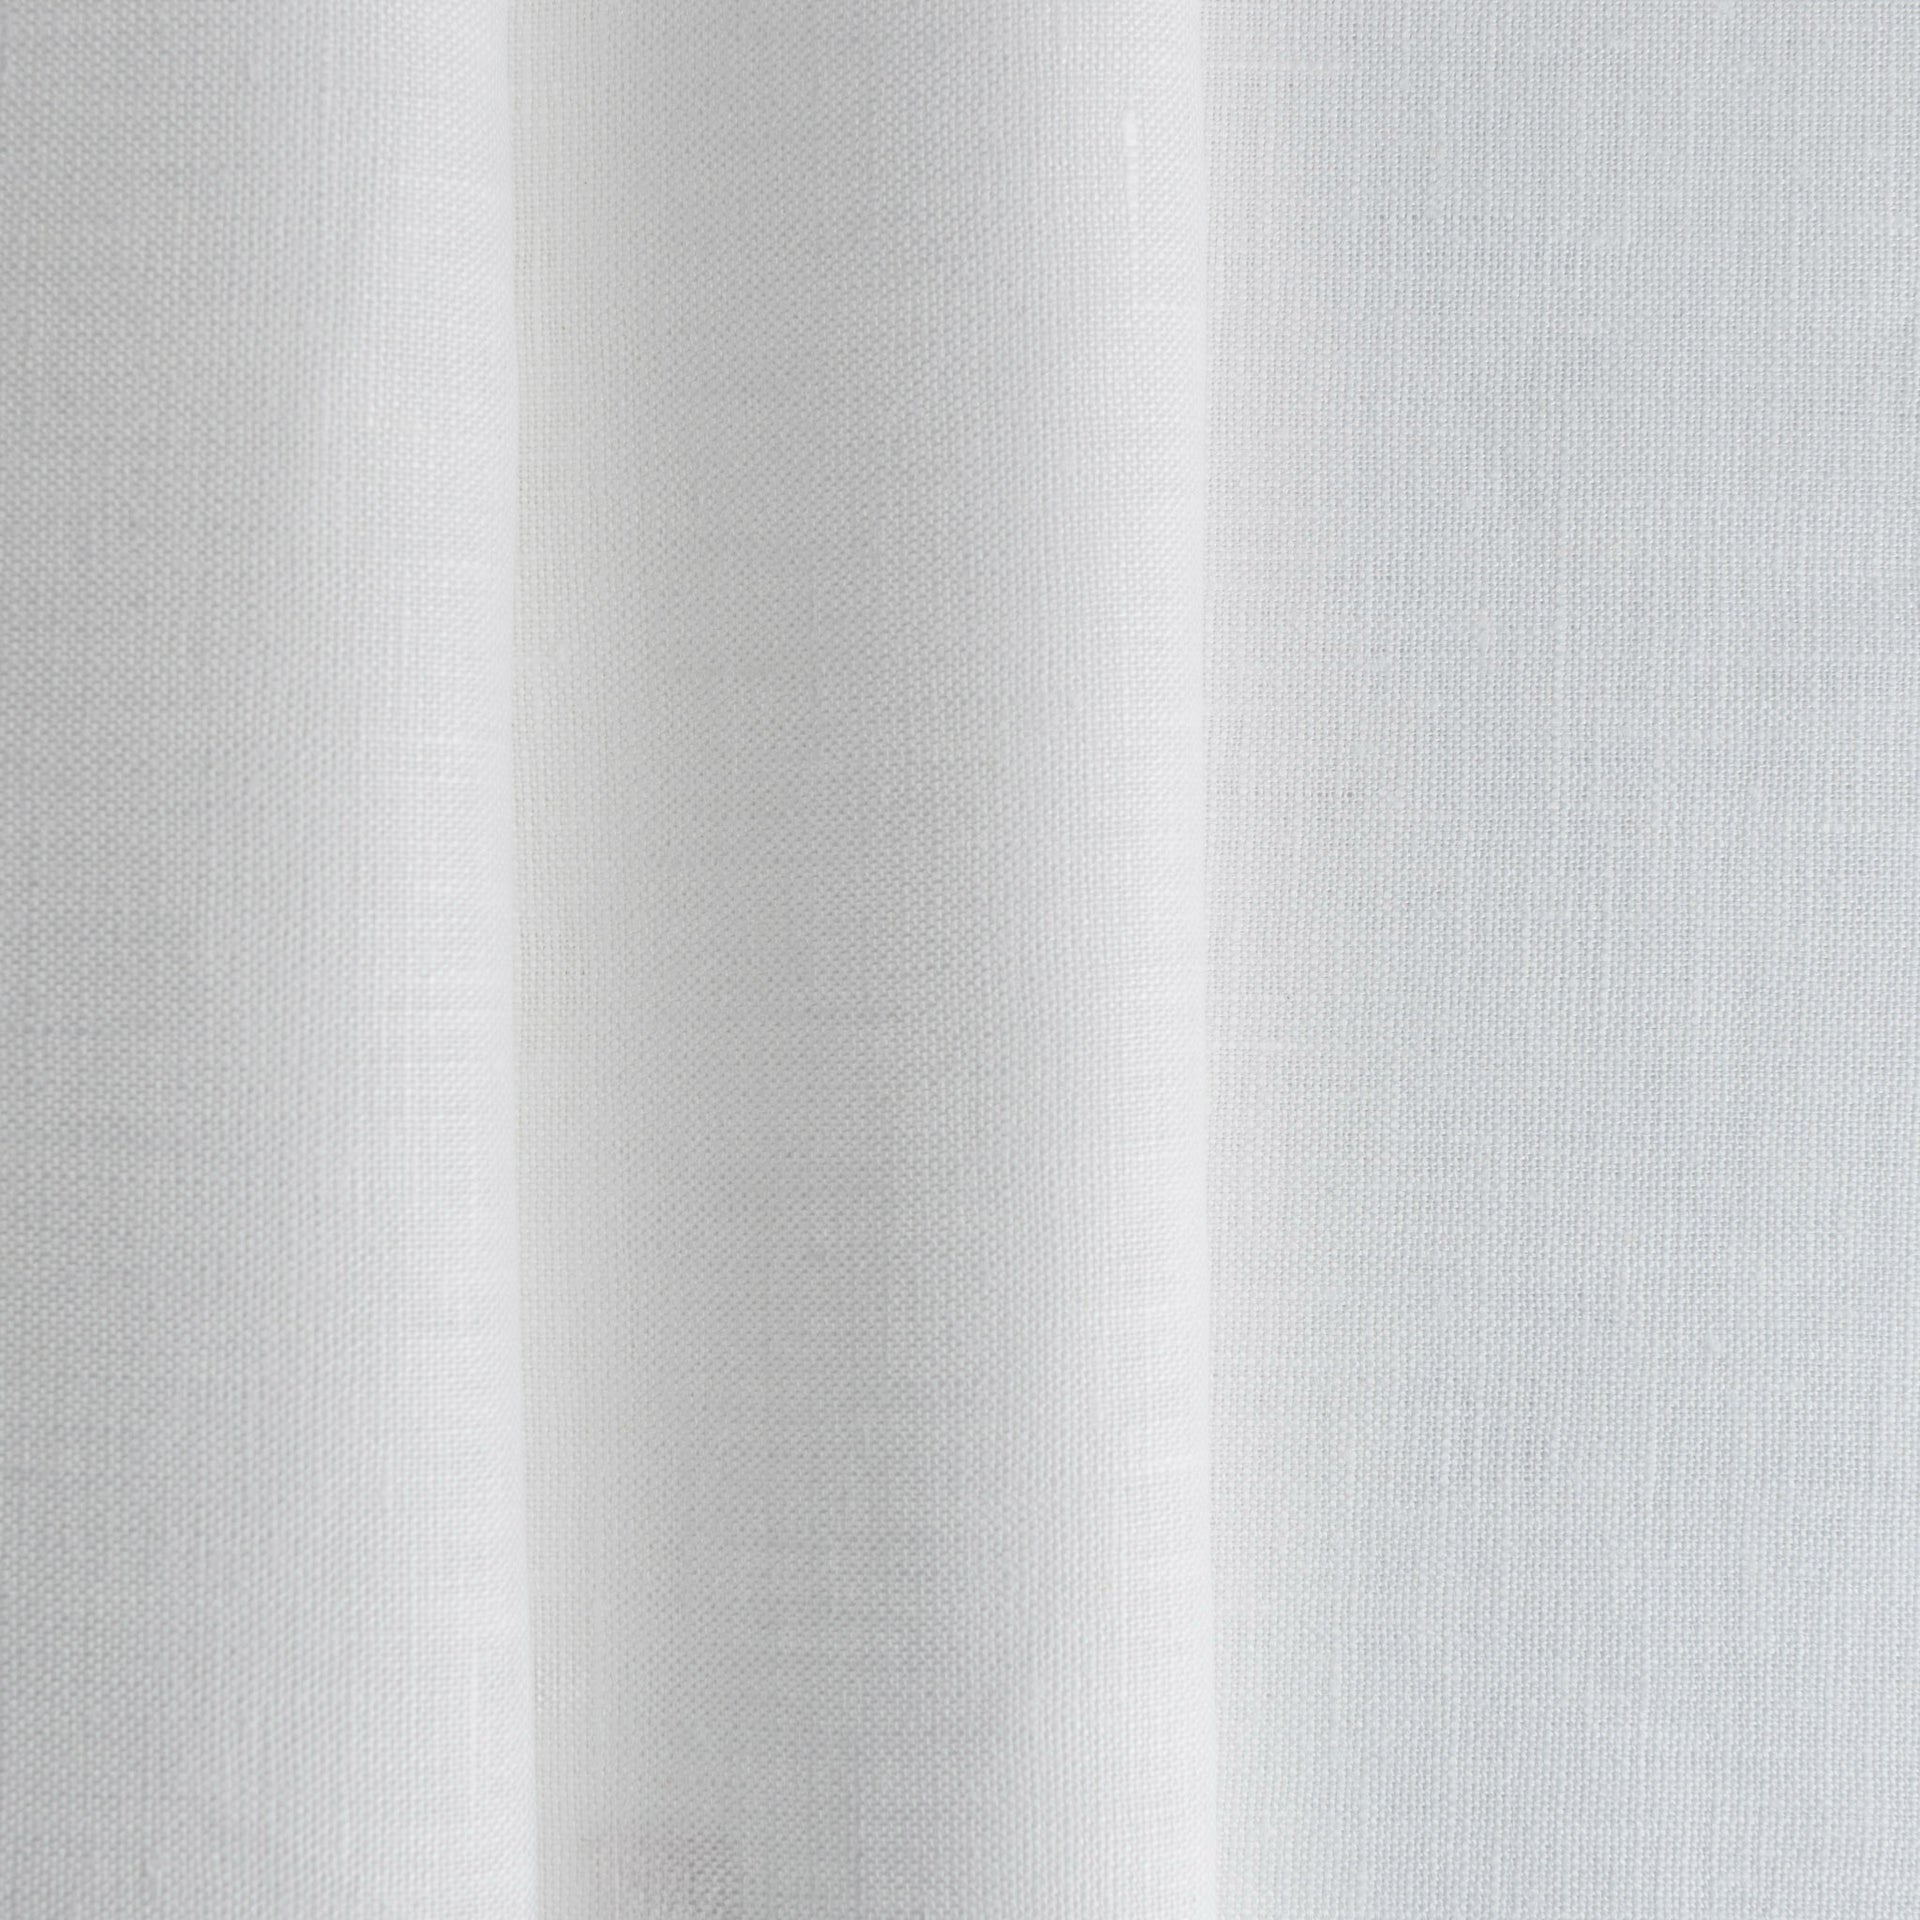 Off-White Medium Weight Linen Fabric by the Yard - 100% French Natural - Width 52”- 106”